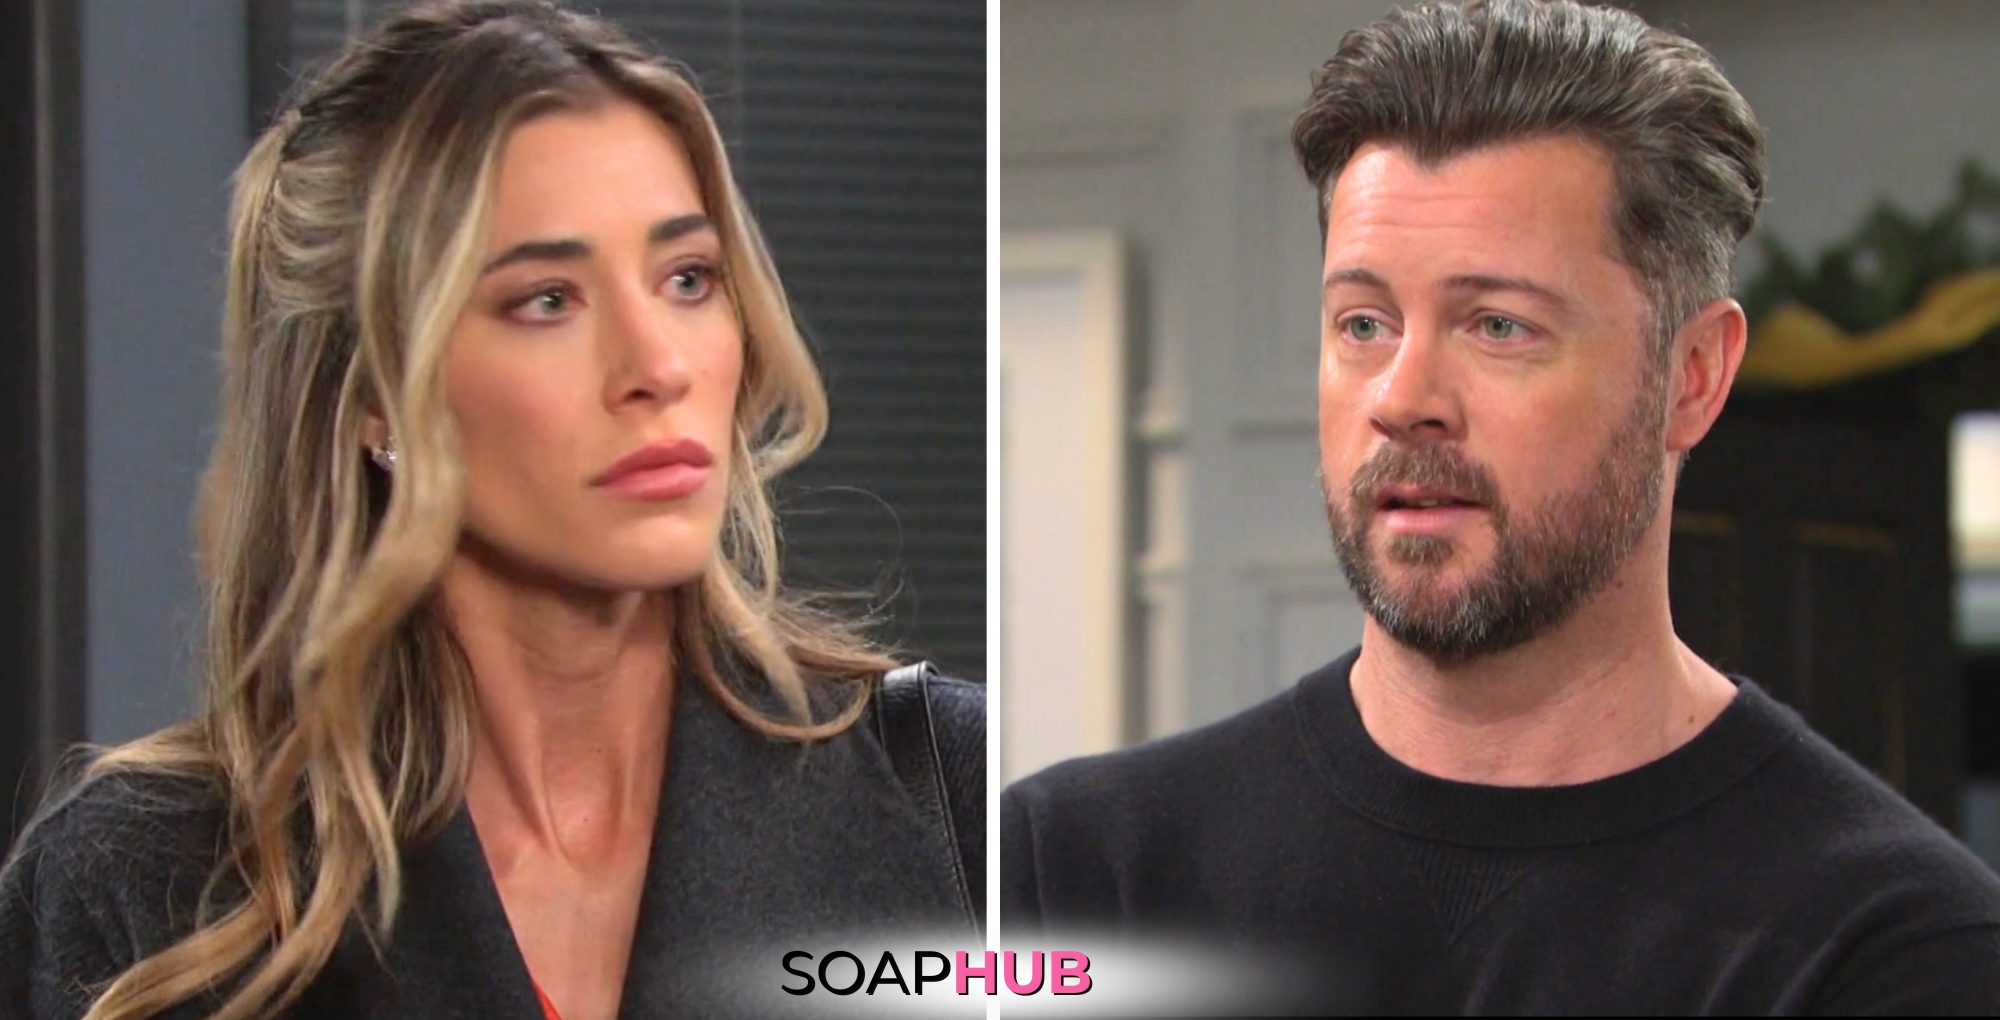 Days of our Lives spoilers for May 13 feature Sloan and Eric with the Soap Hub logo.